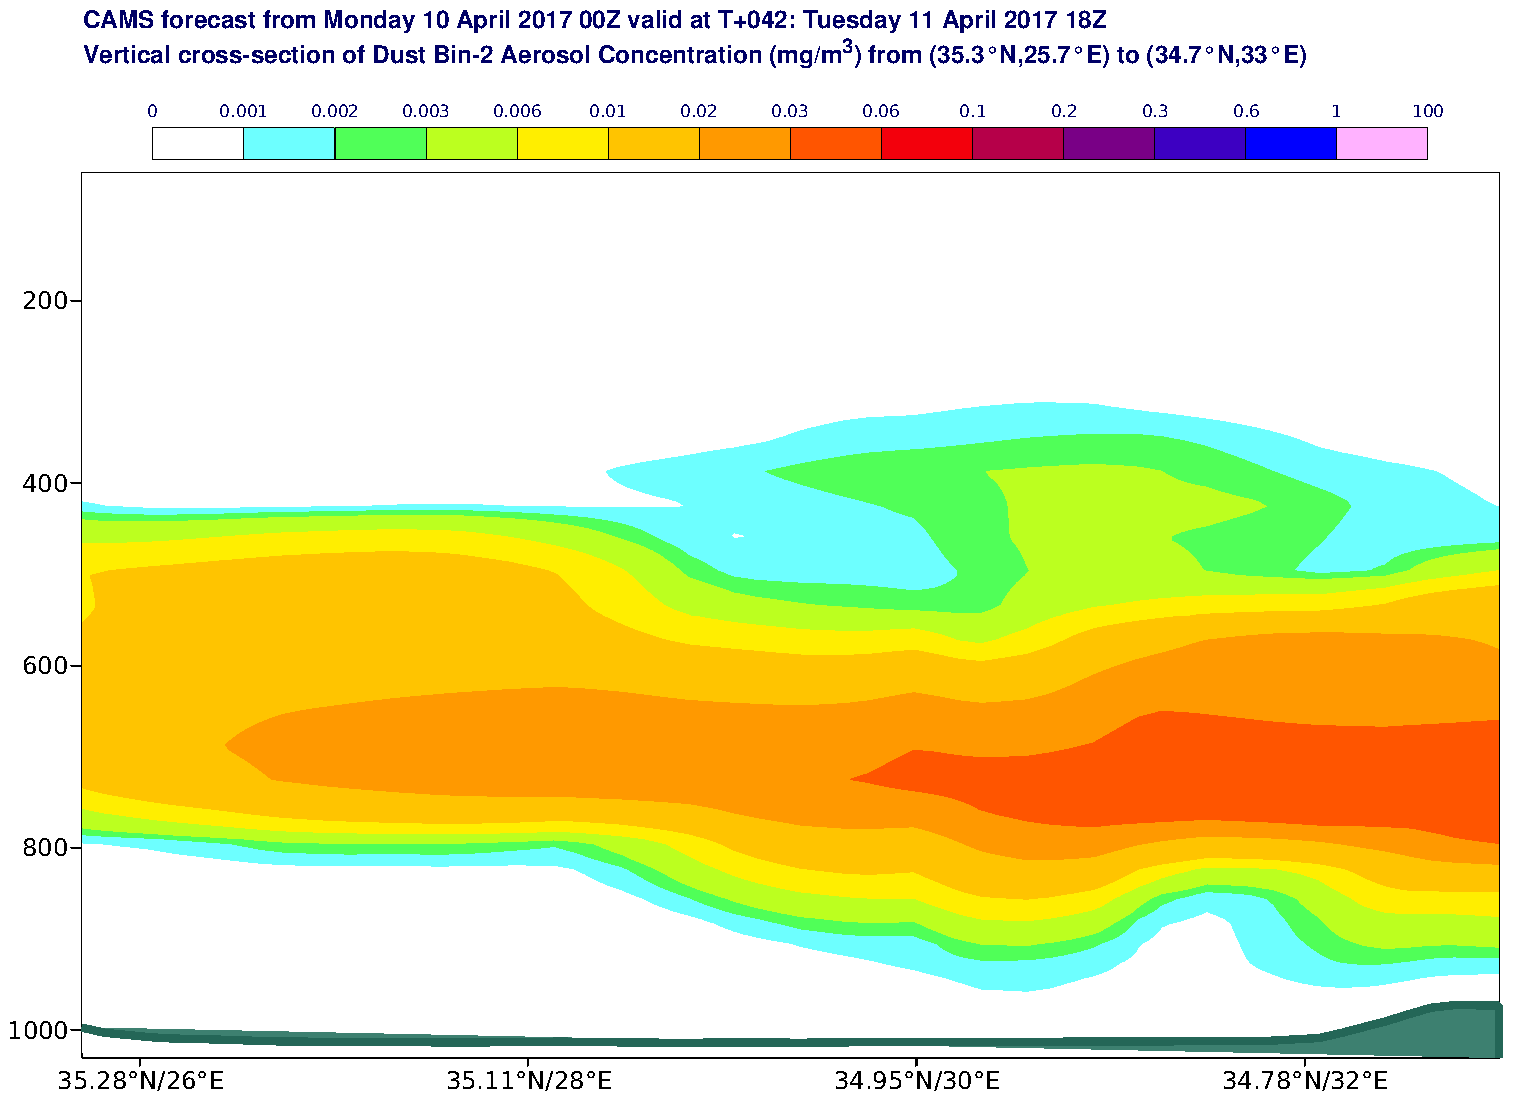 Vertical cross-section of Dust Bin-2 Aerosol Concentration (mg/m3) valid at T42 - 2017-04-11 18:00